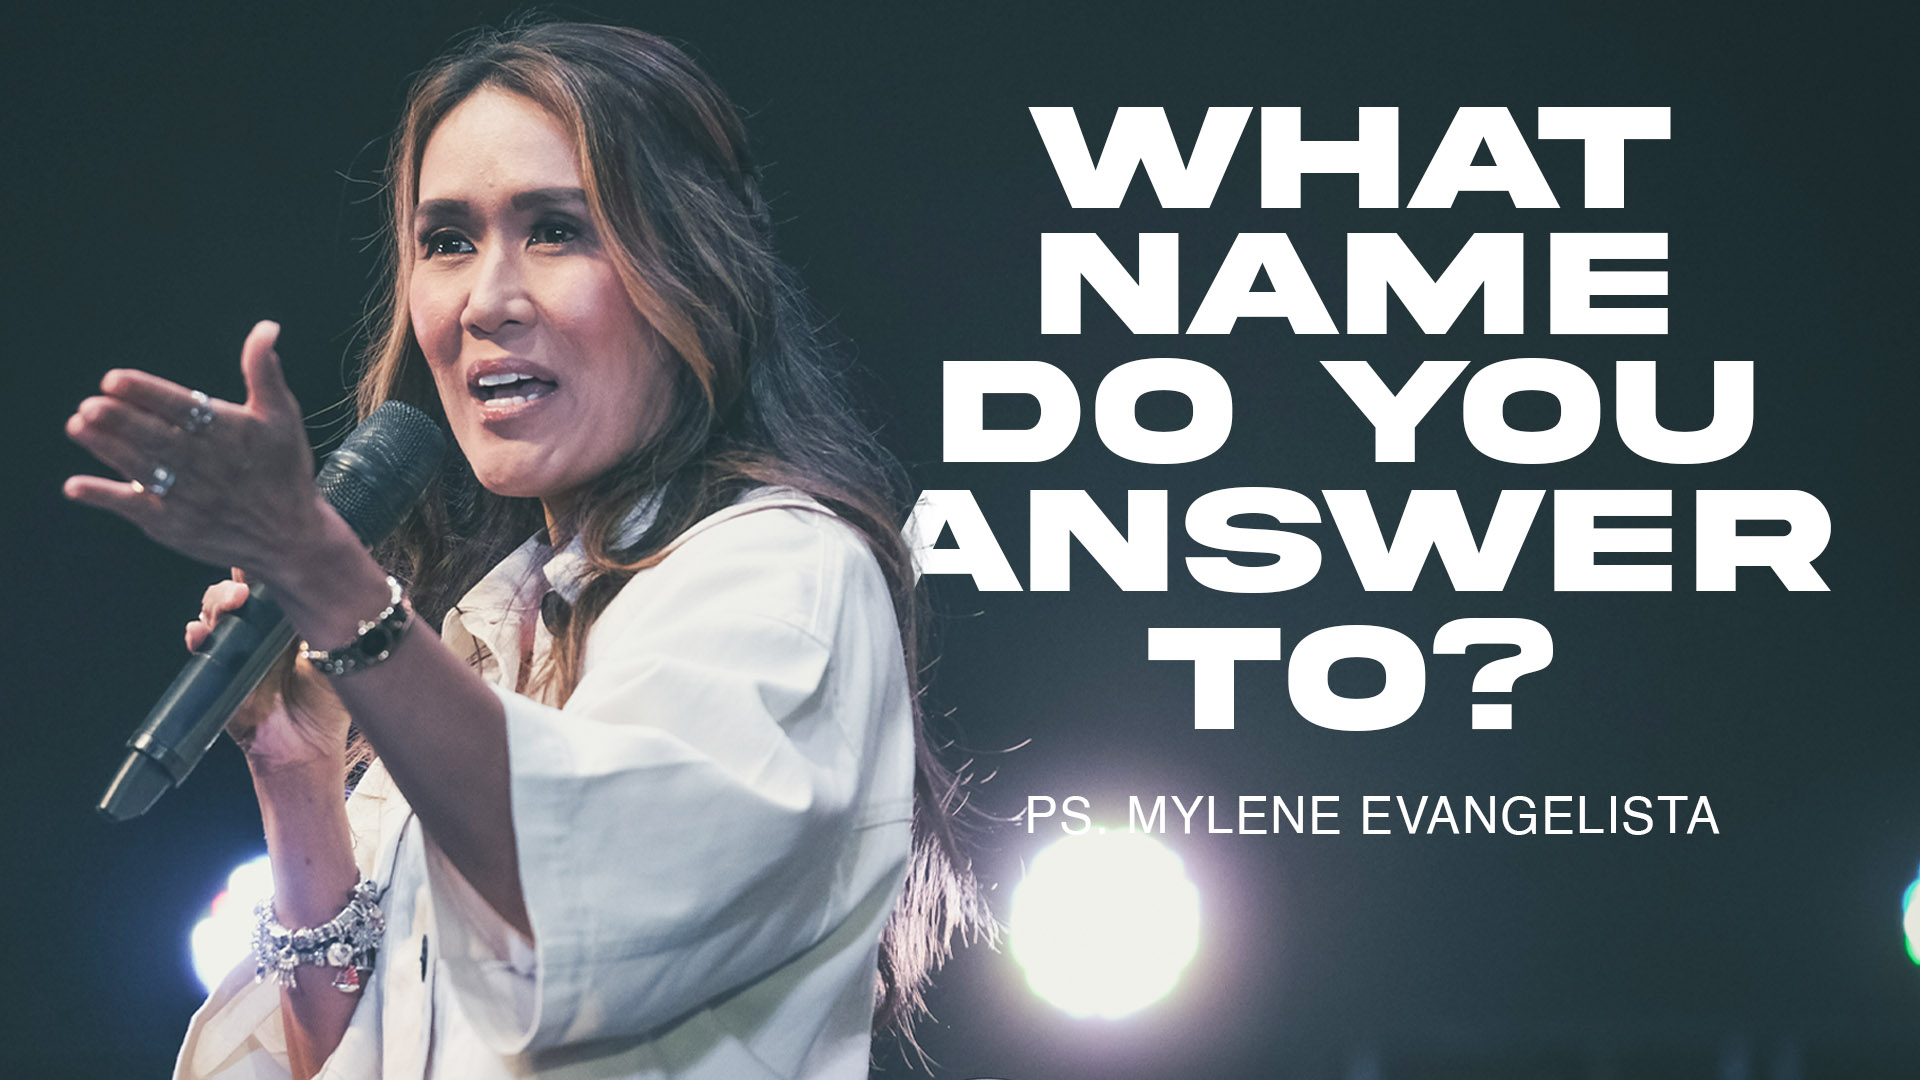 WHAT NAME DO YOU ANSWER TO? Image